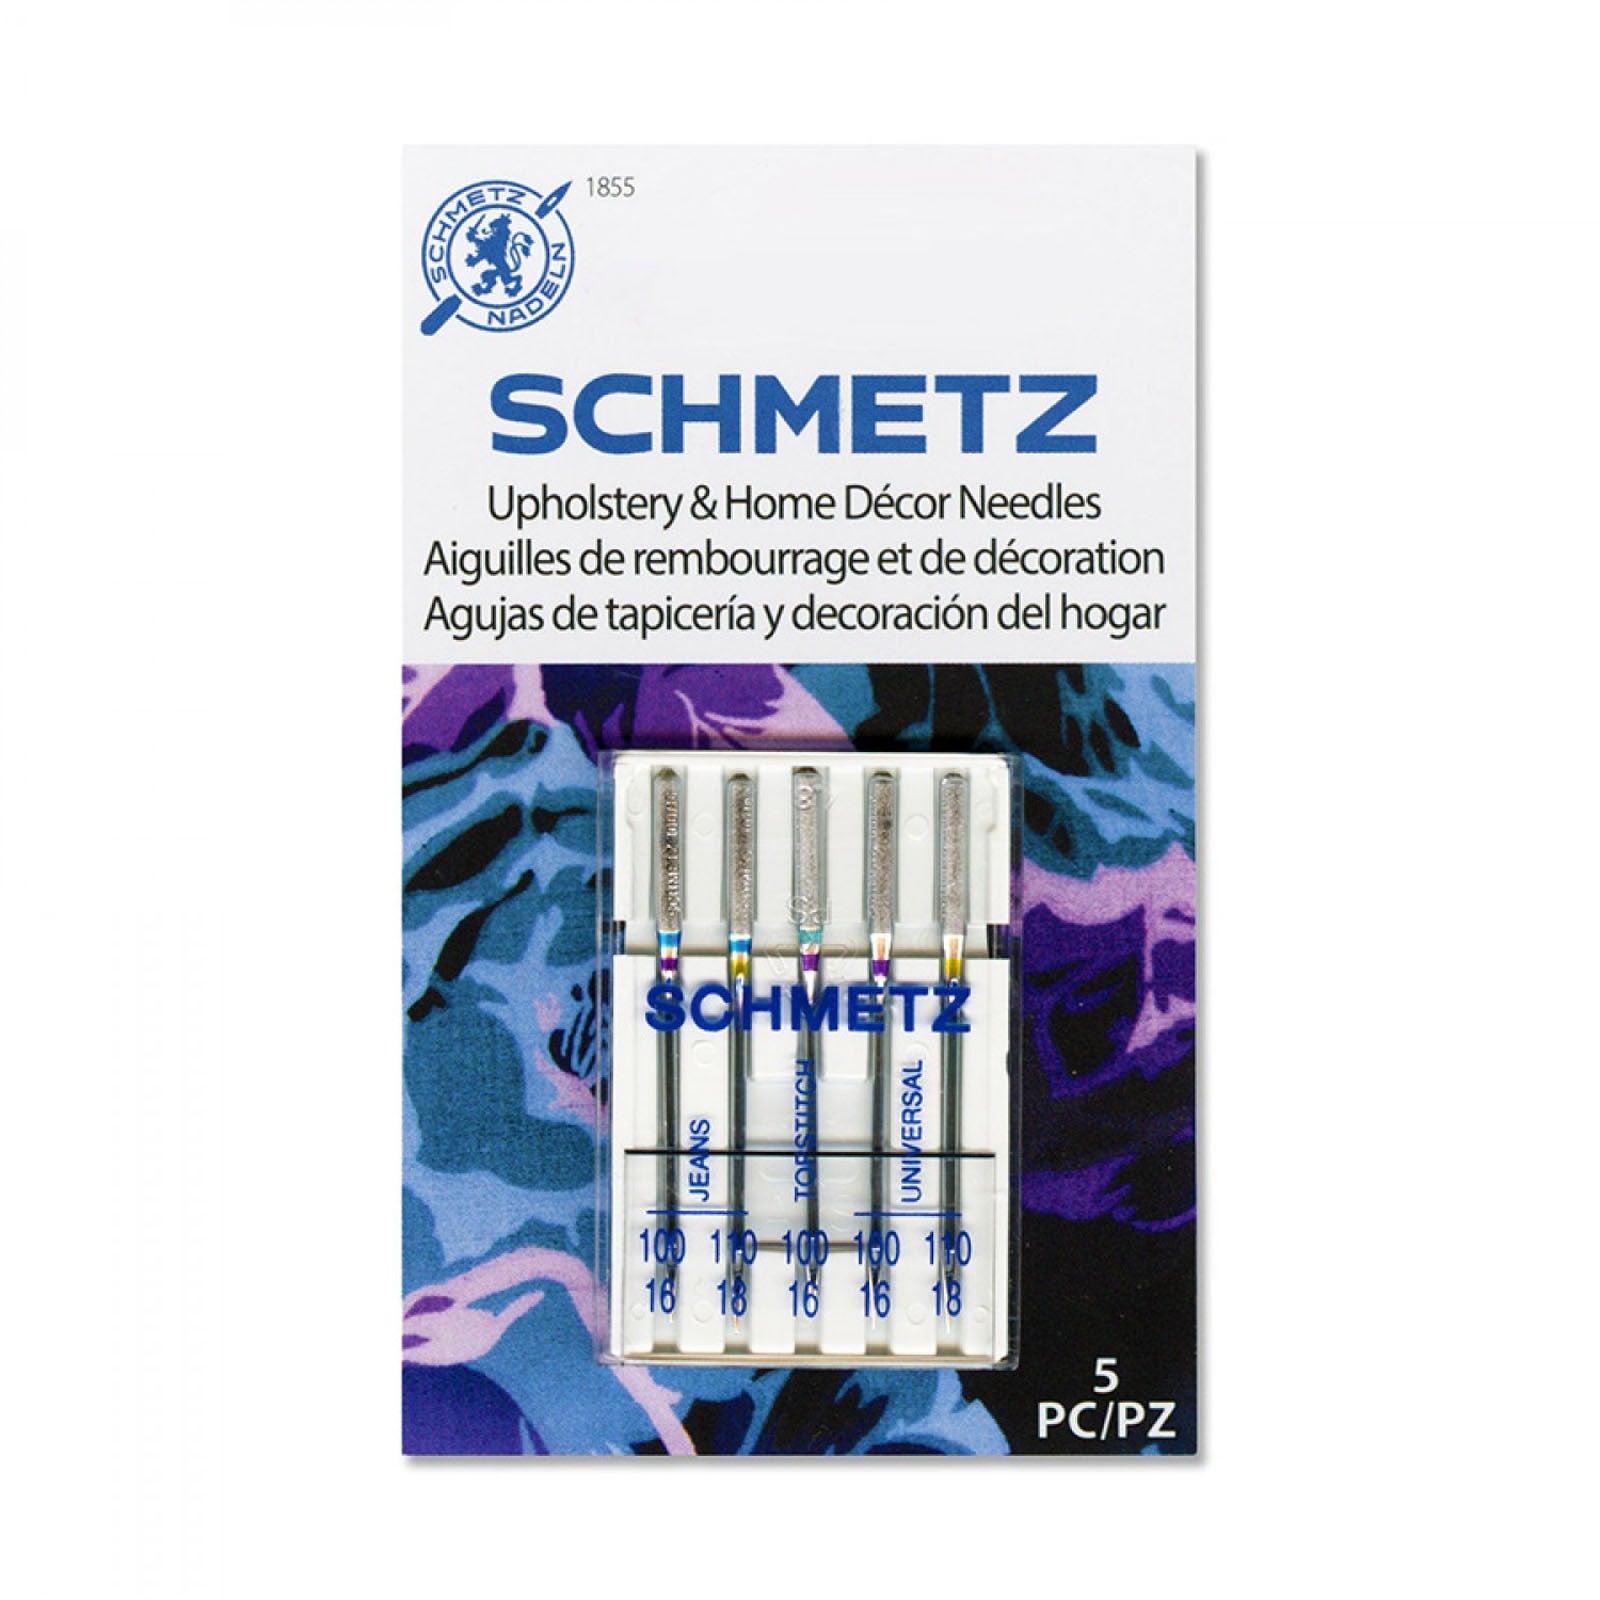 Schmetz Upholstery &amp; Home Decor Needles Assorted Pack